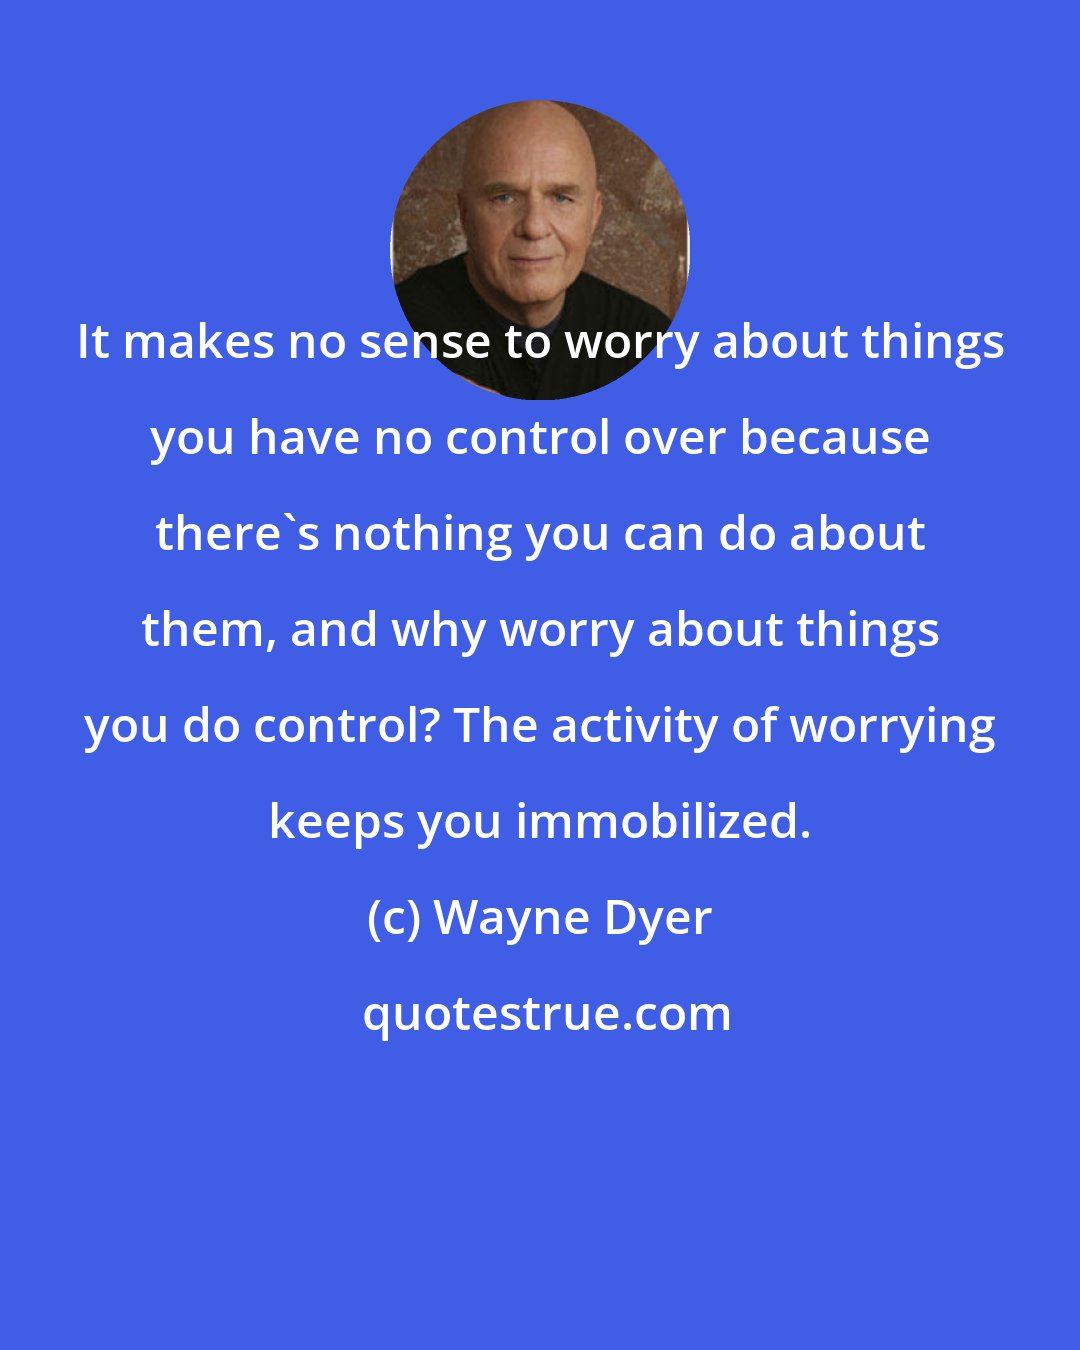 Wayne Dyer: It makes no sense to worry about things you have no control over because there's nothing you can do about them, and why worry about things you do control? The activity of worrying keeps you immobilized.